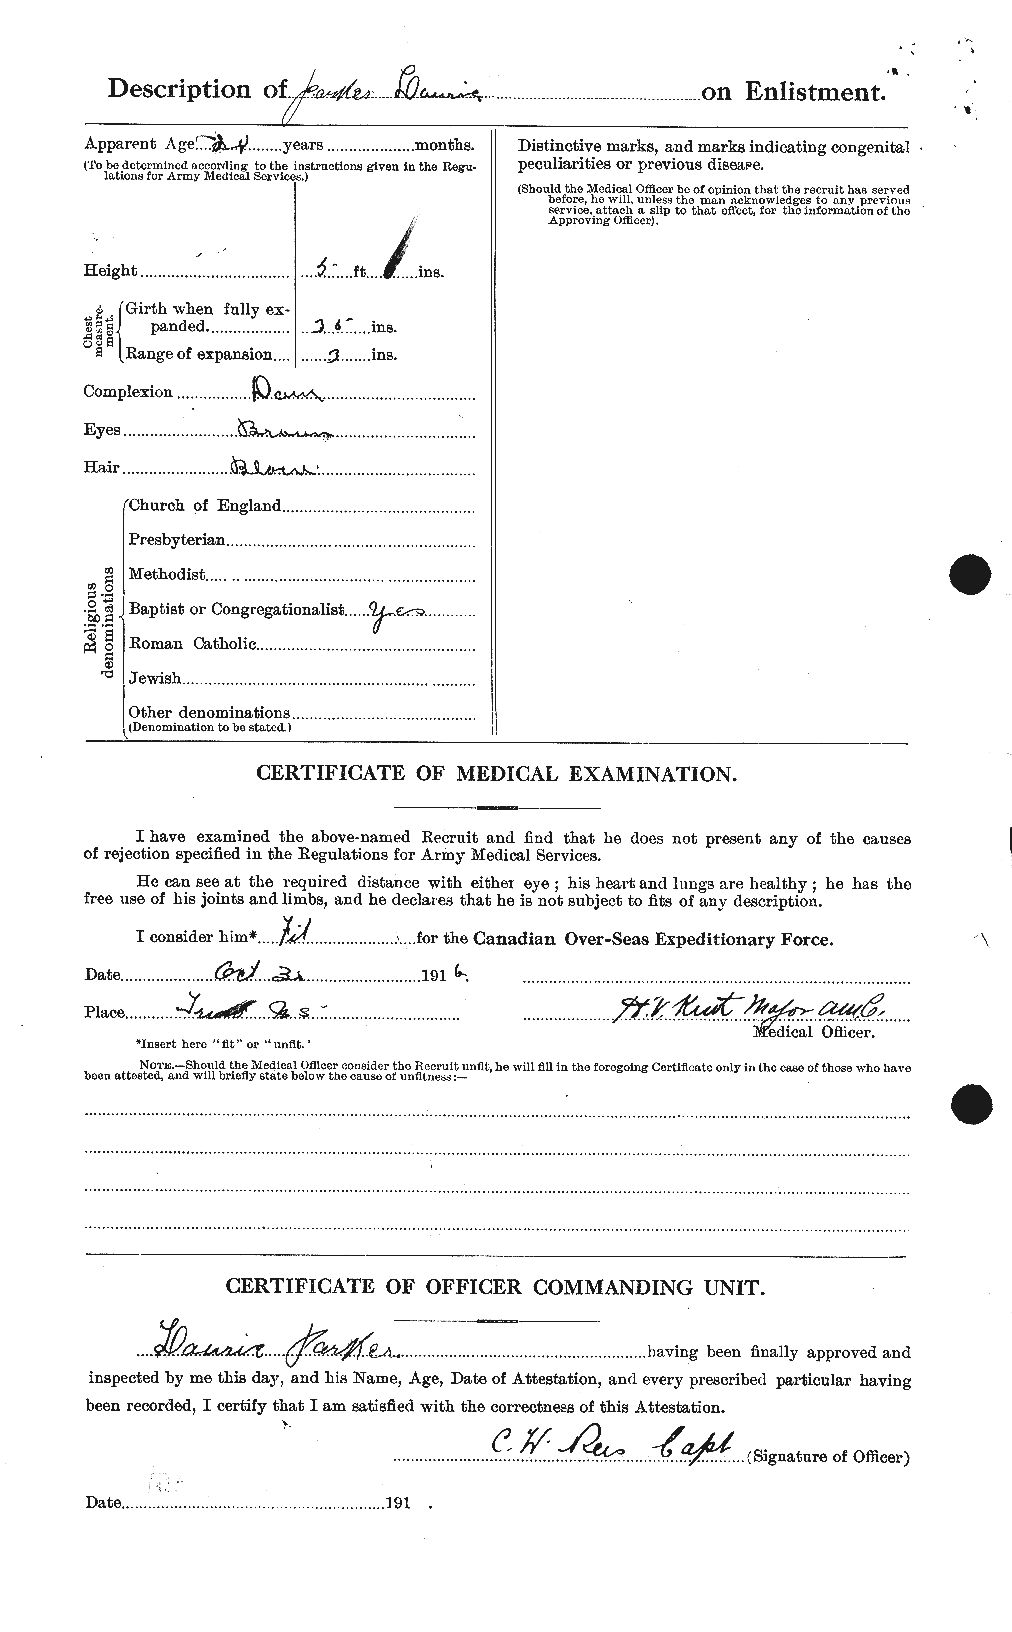 Personnel Records of the First World War - CEF 565519b